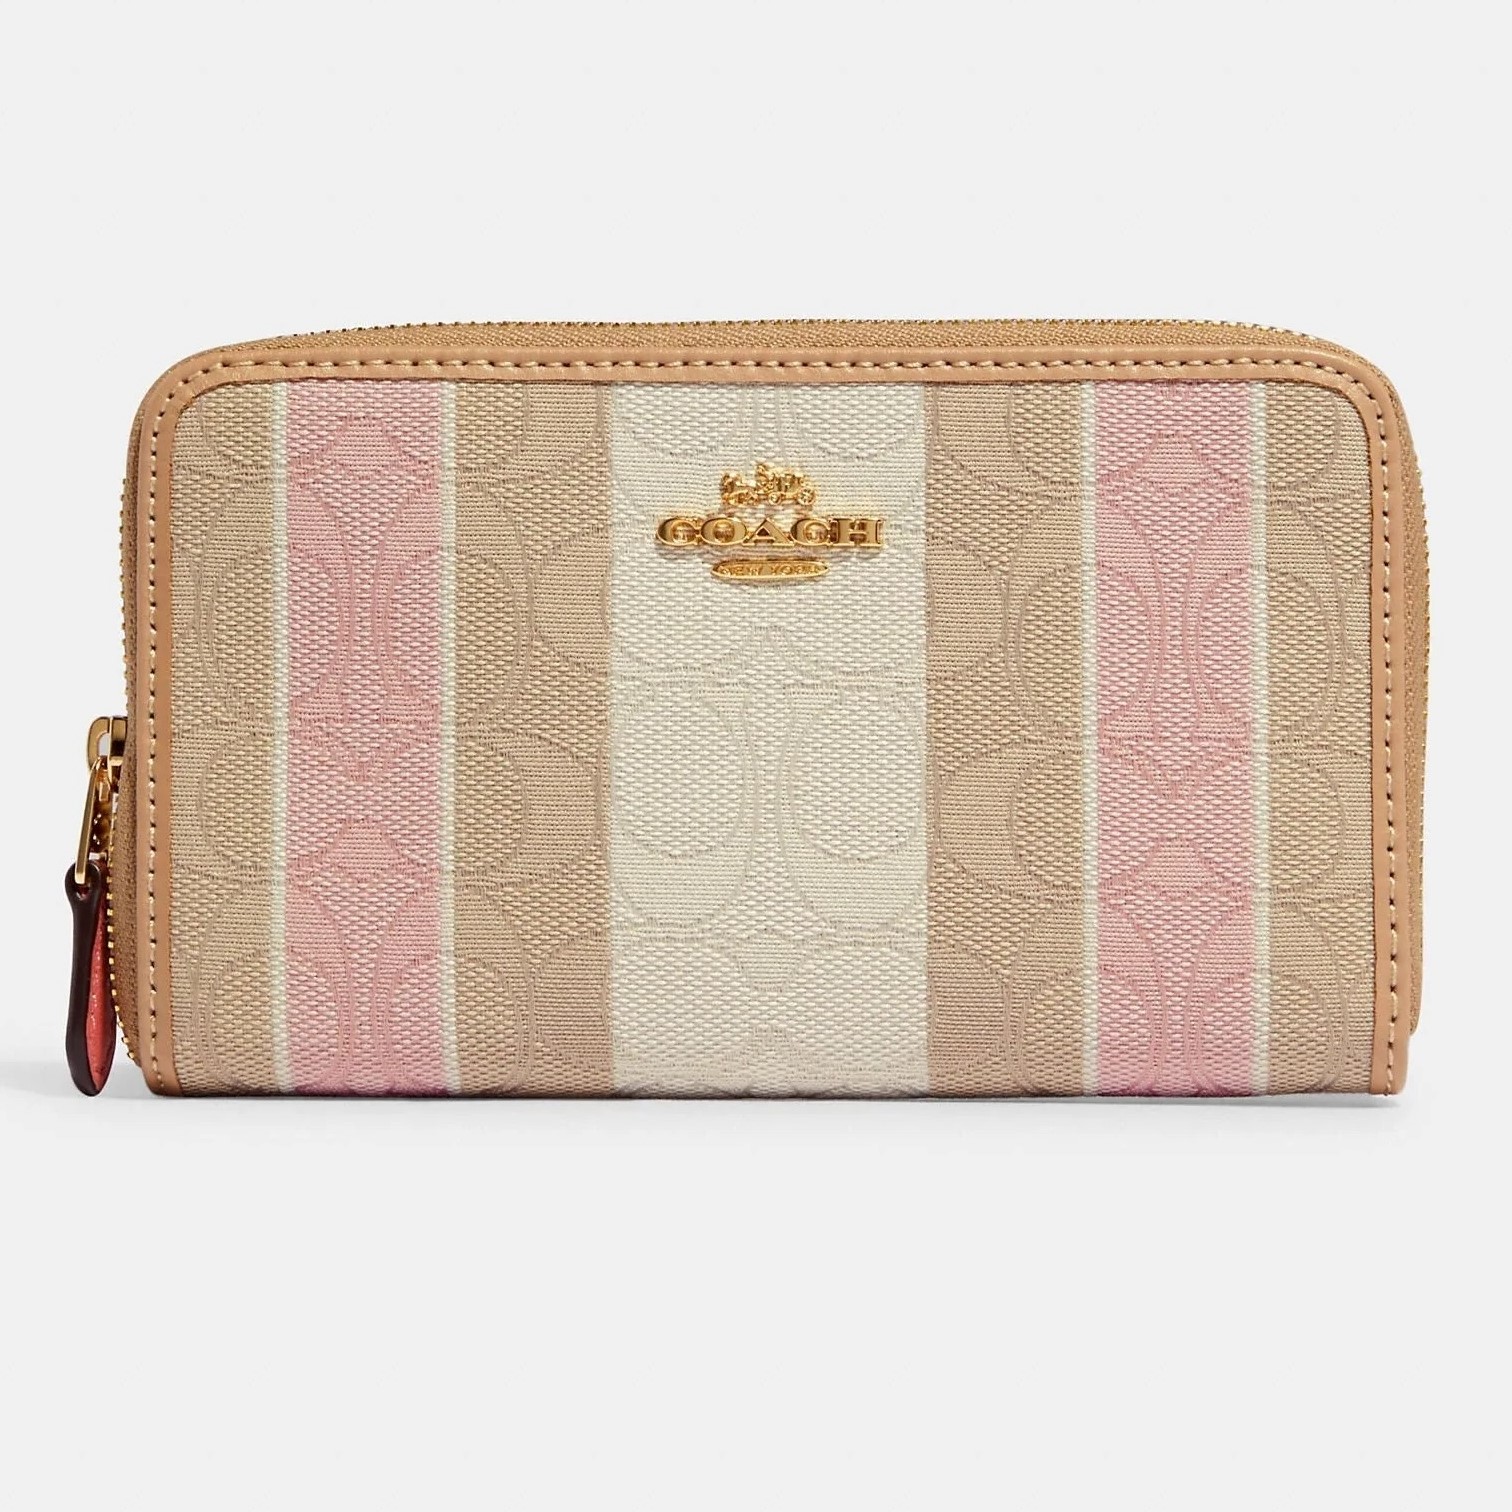 VÍ COACH NỮ MEDIUM ID ZIP WALLET IN SIGNATURE JACQUARD WITH STRIPES 6